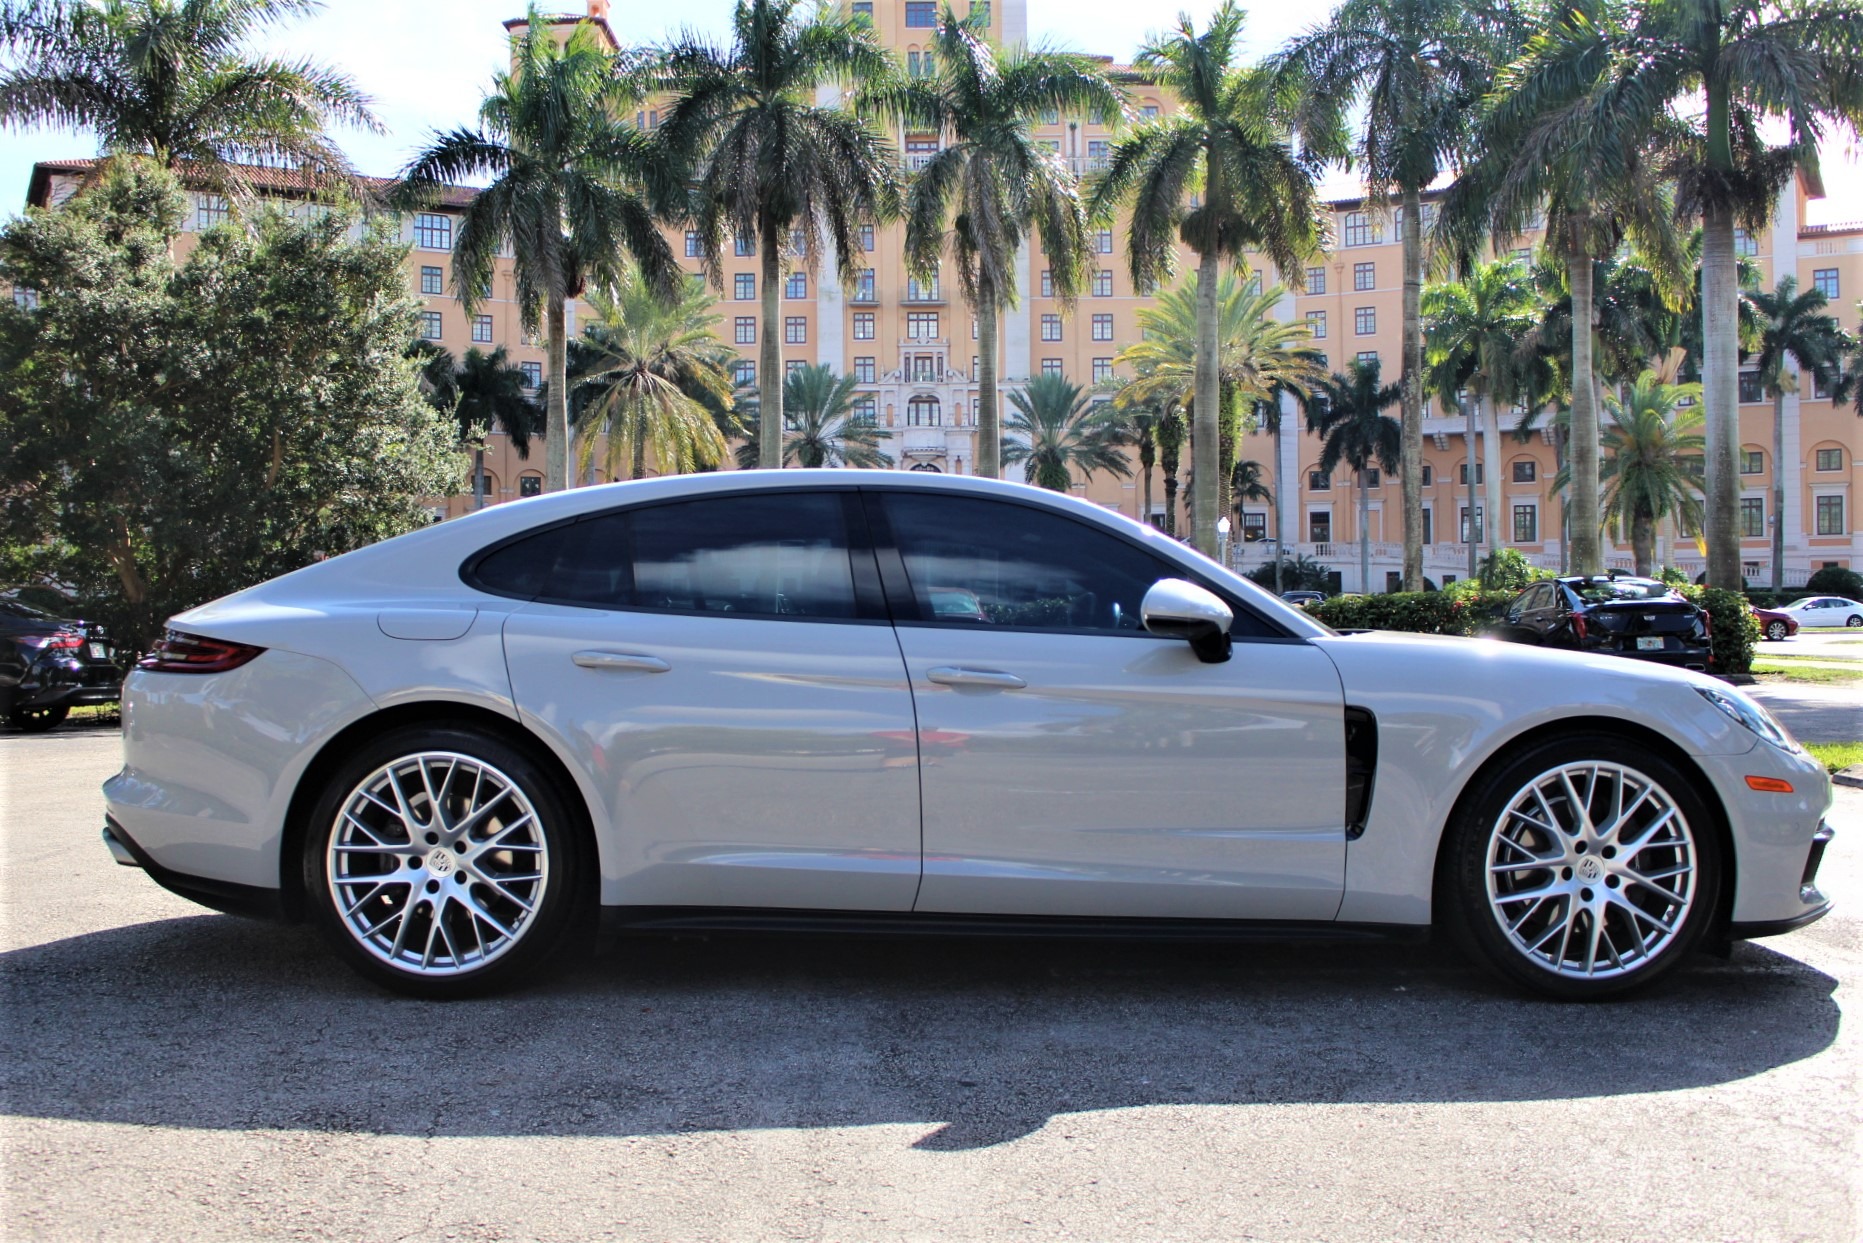 Used 2018 Porsche Panamera BASE for sale $79,450 at The Gables Sports Cars in Miami FL 33146 1